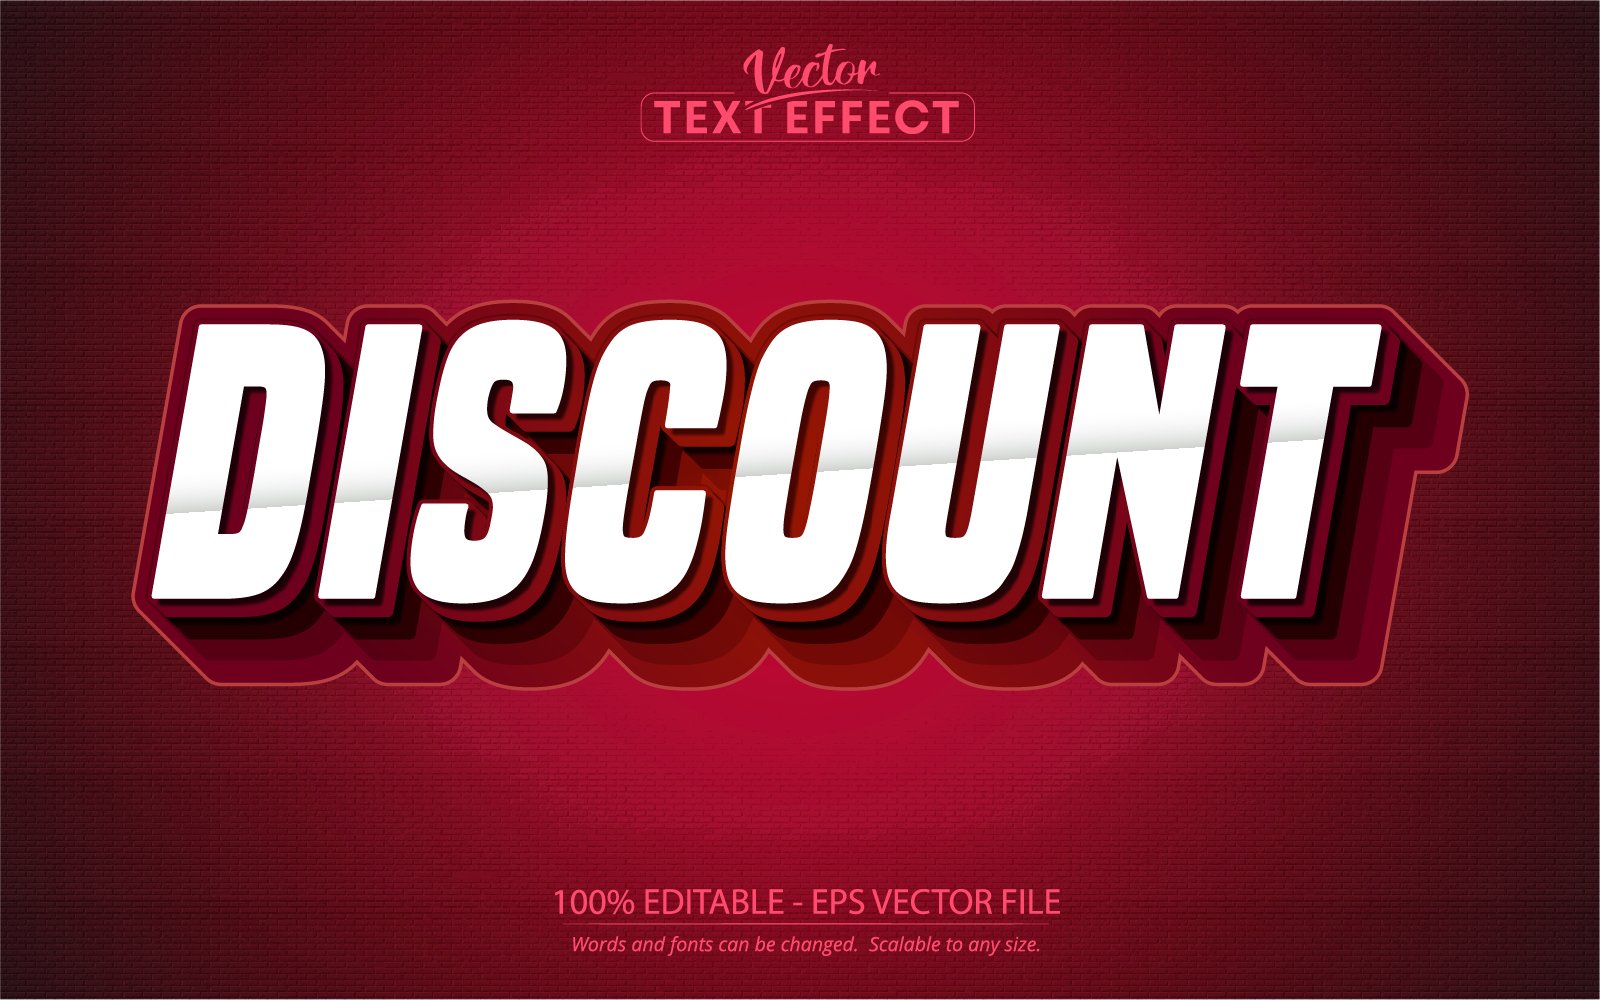 Discount - Editable Text Effect, Comic And Cartoon Text Style, Graphics Illustration